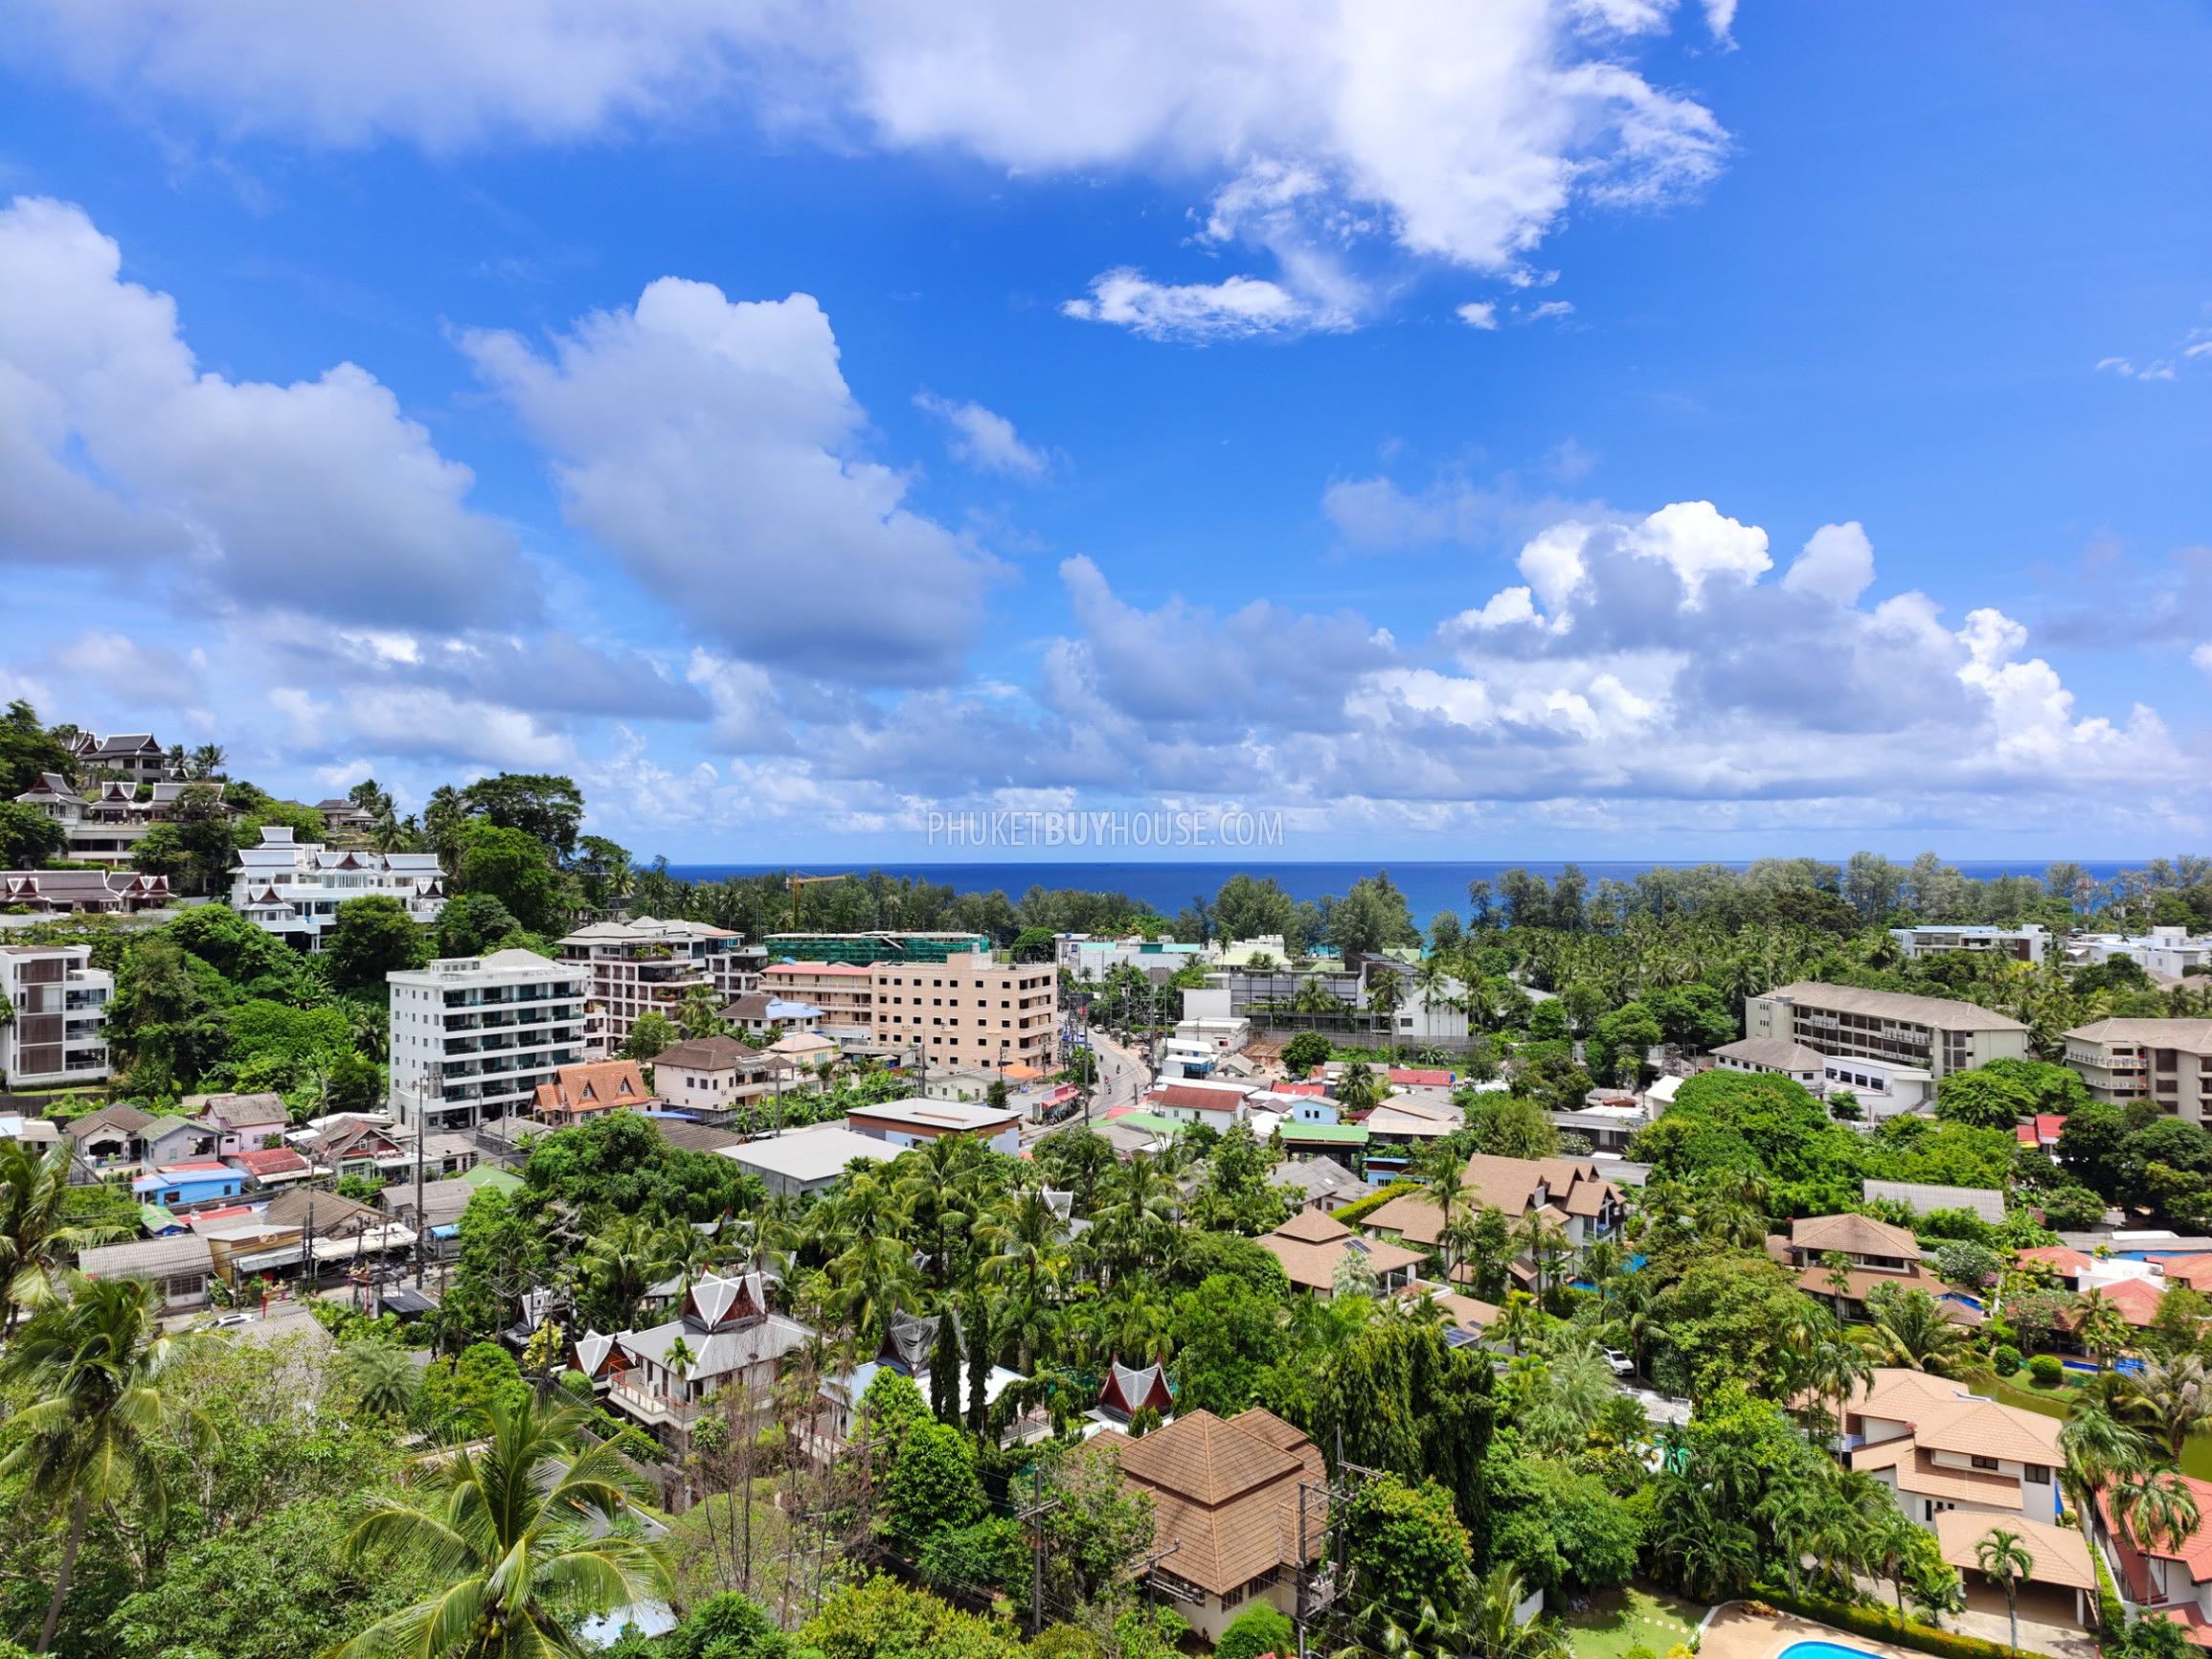 SUR22000: Irresistible Panoramic View from This Three Bedroom Apartment in Surin. Photo #32